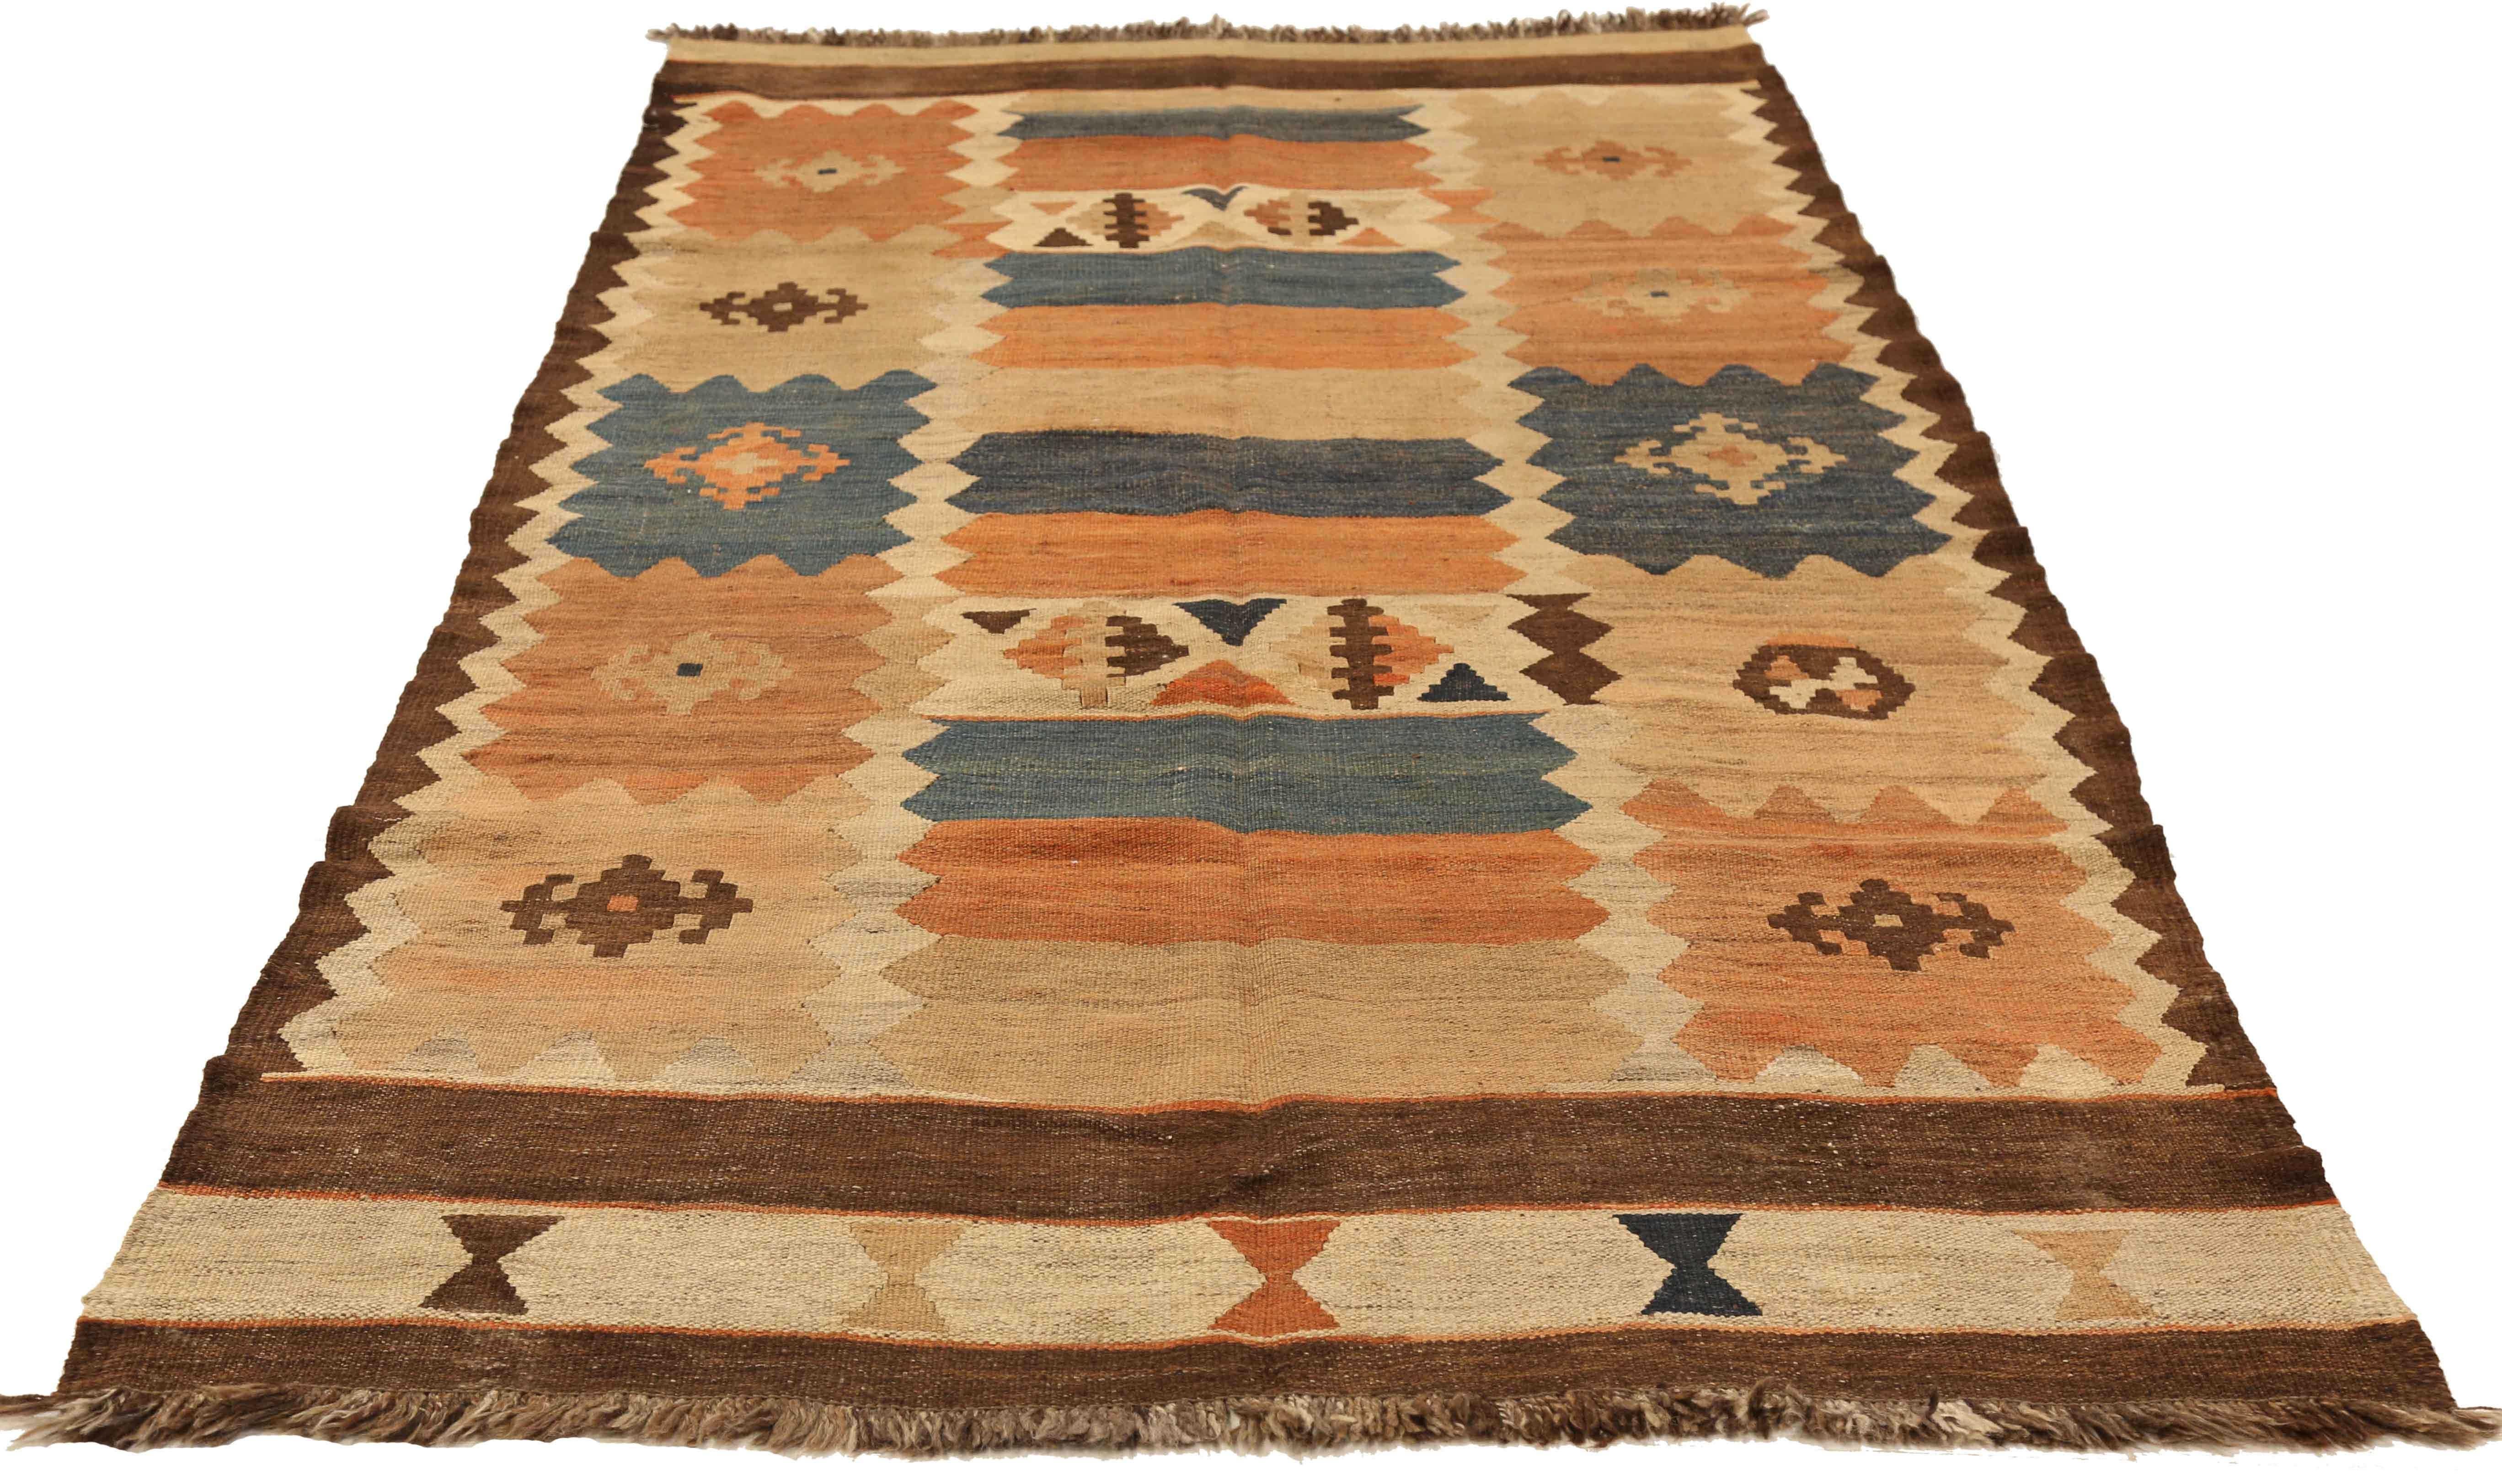 Antique Russian area rug handwoven from the finest sheep’s wool. It’s colored with all-natural vegetable dyes that are safe for humans and pets. It’s a traditional Kilim design handwoven by expert artisans. It’s a lovely area rug that can be